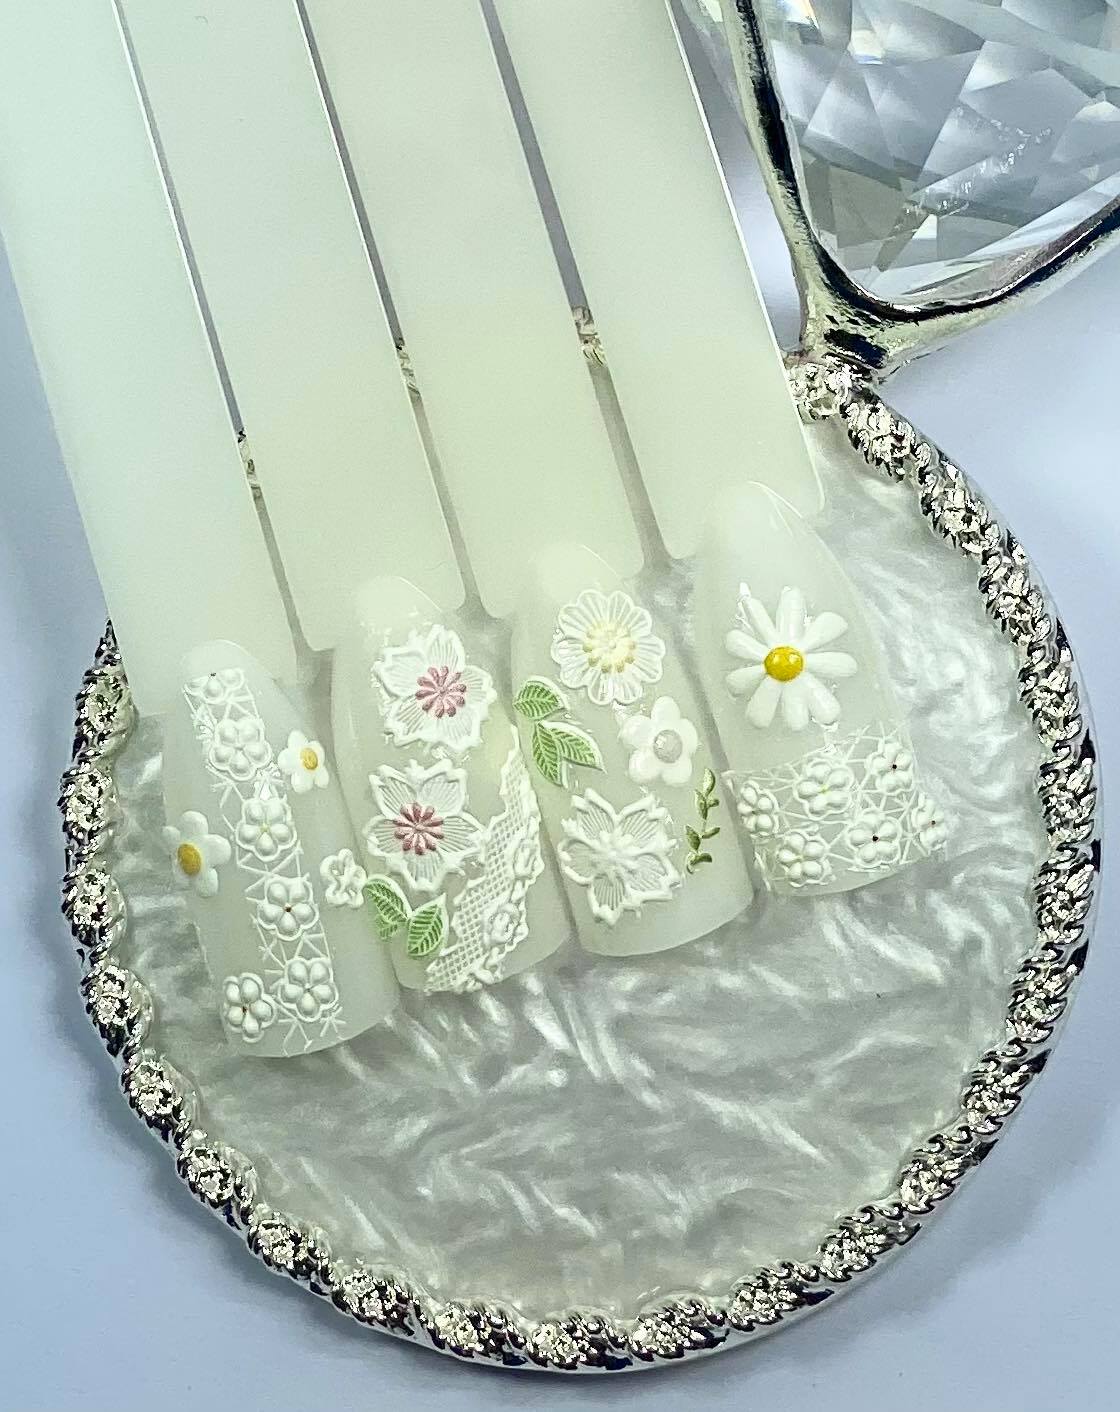 Lace and Flowers 5D Nail Stickers